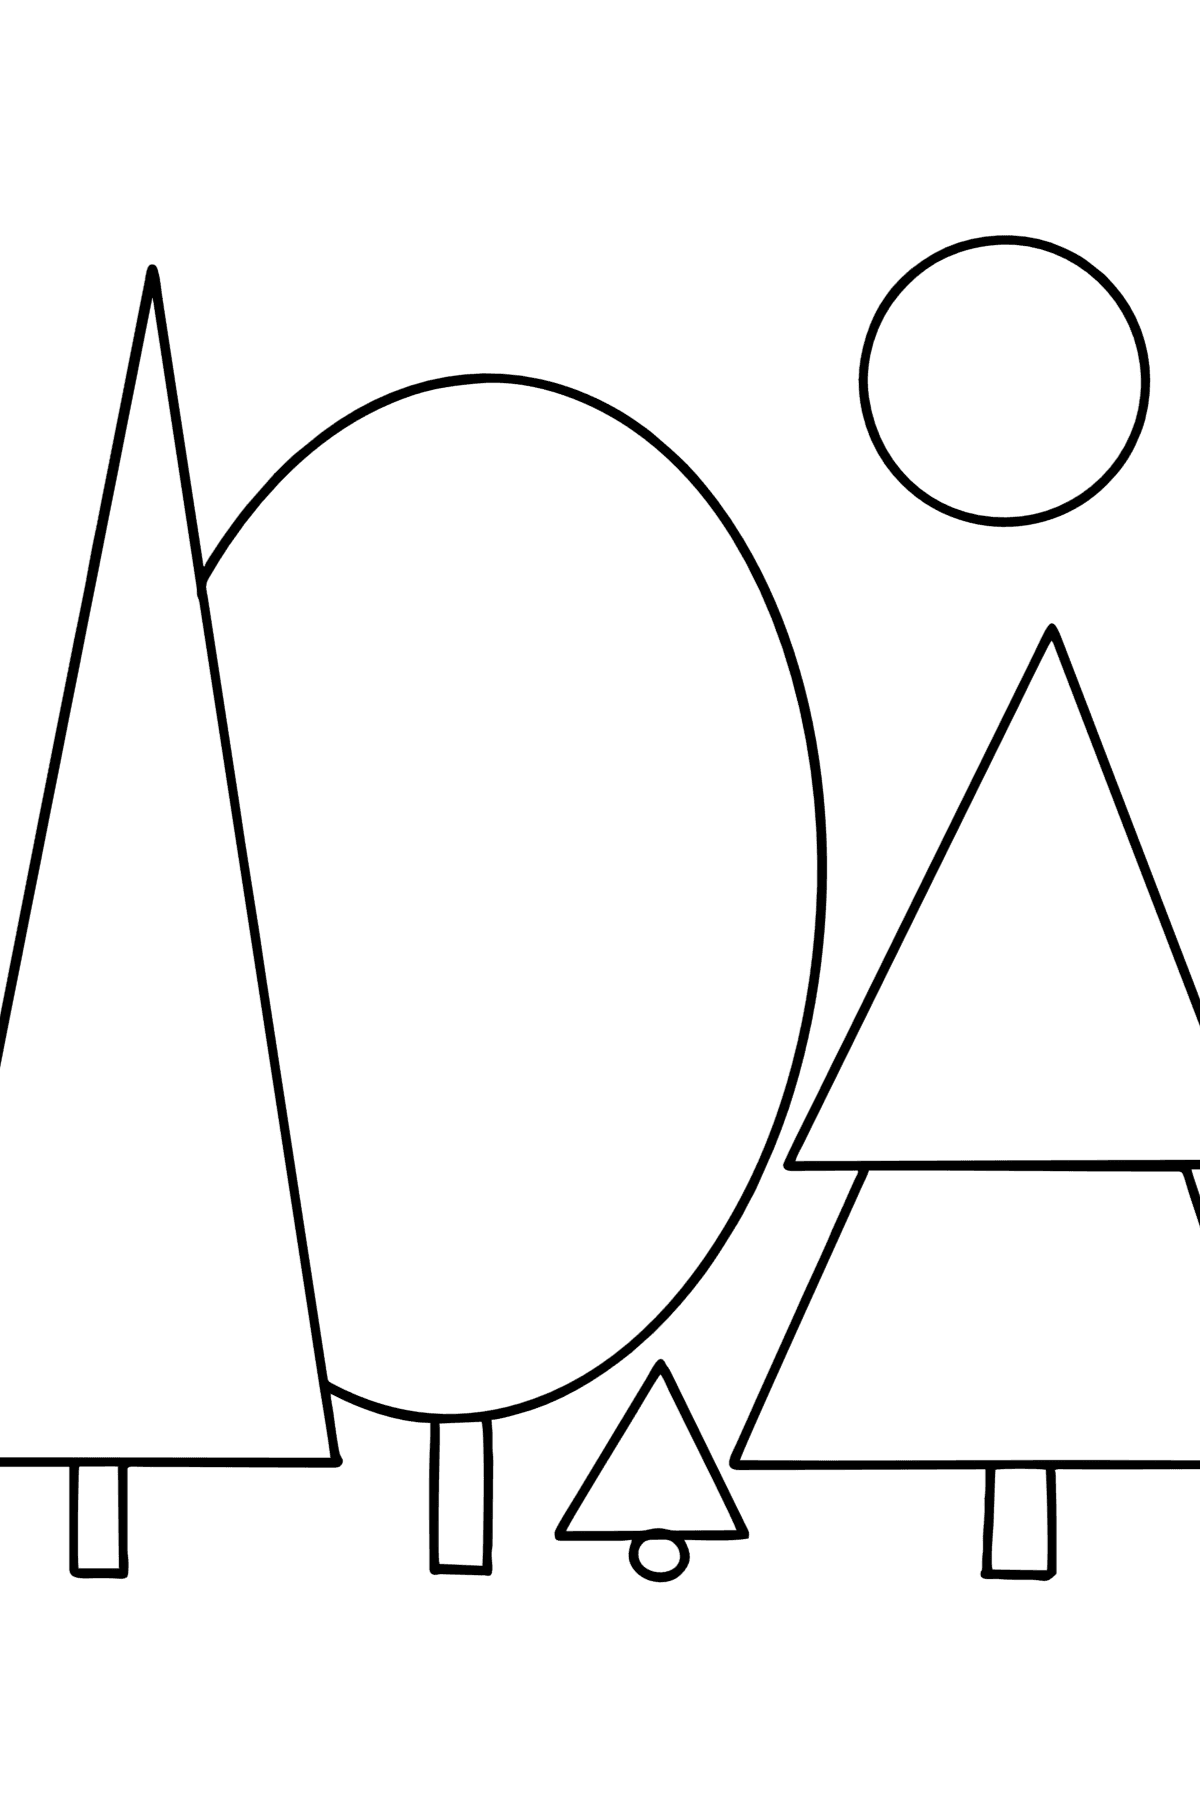 Geometric Forest Landscape coloring page - Coloring Pages for Kids